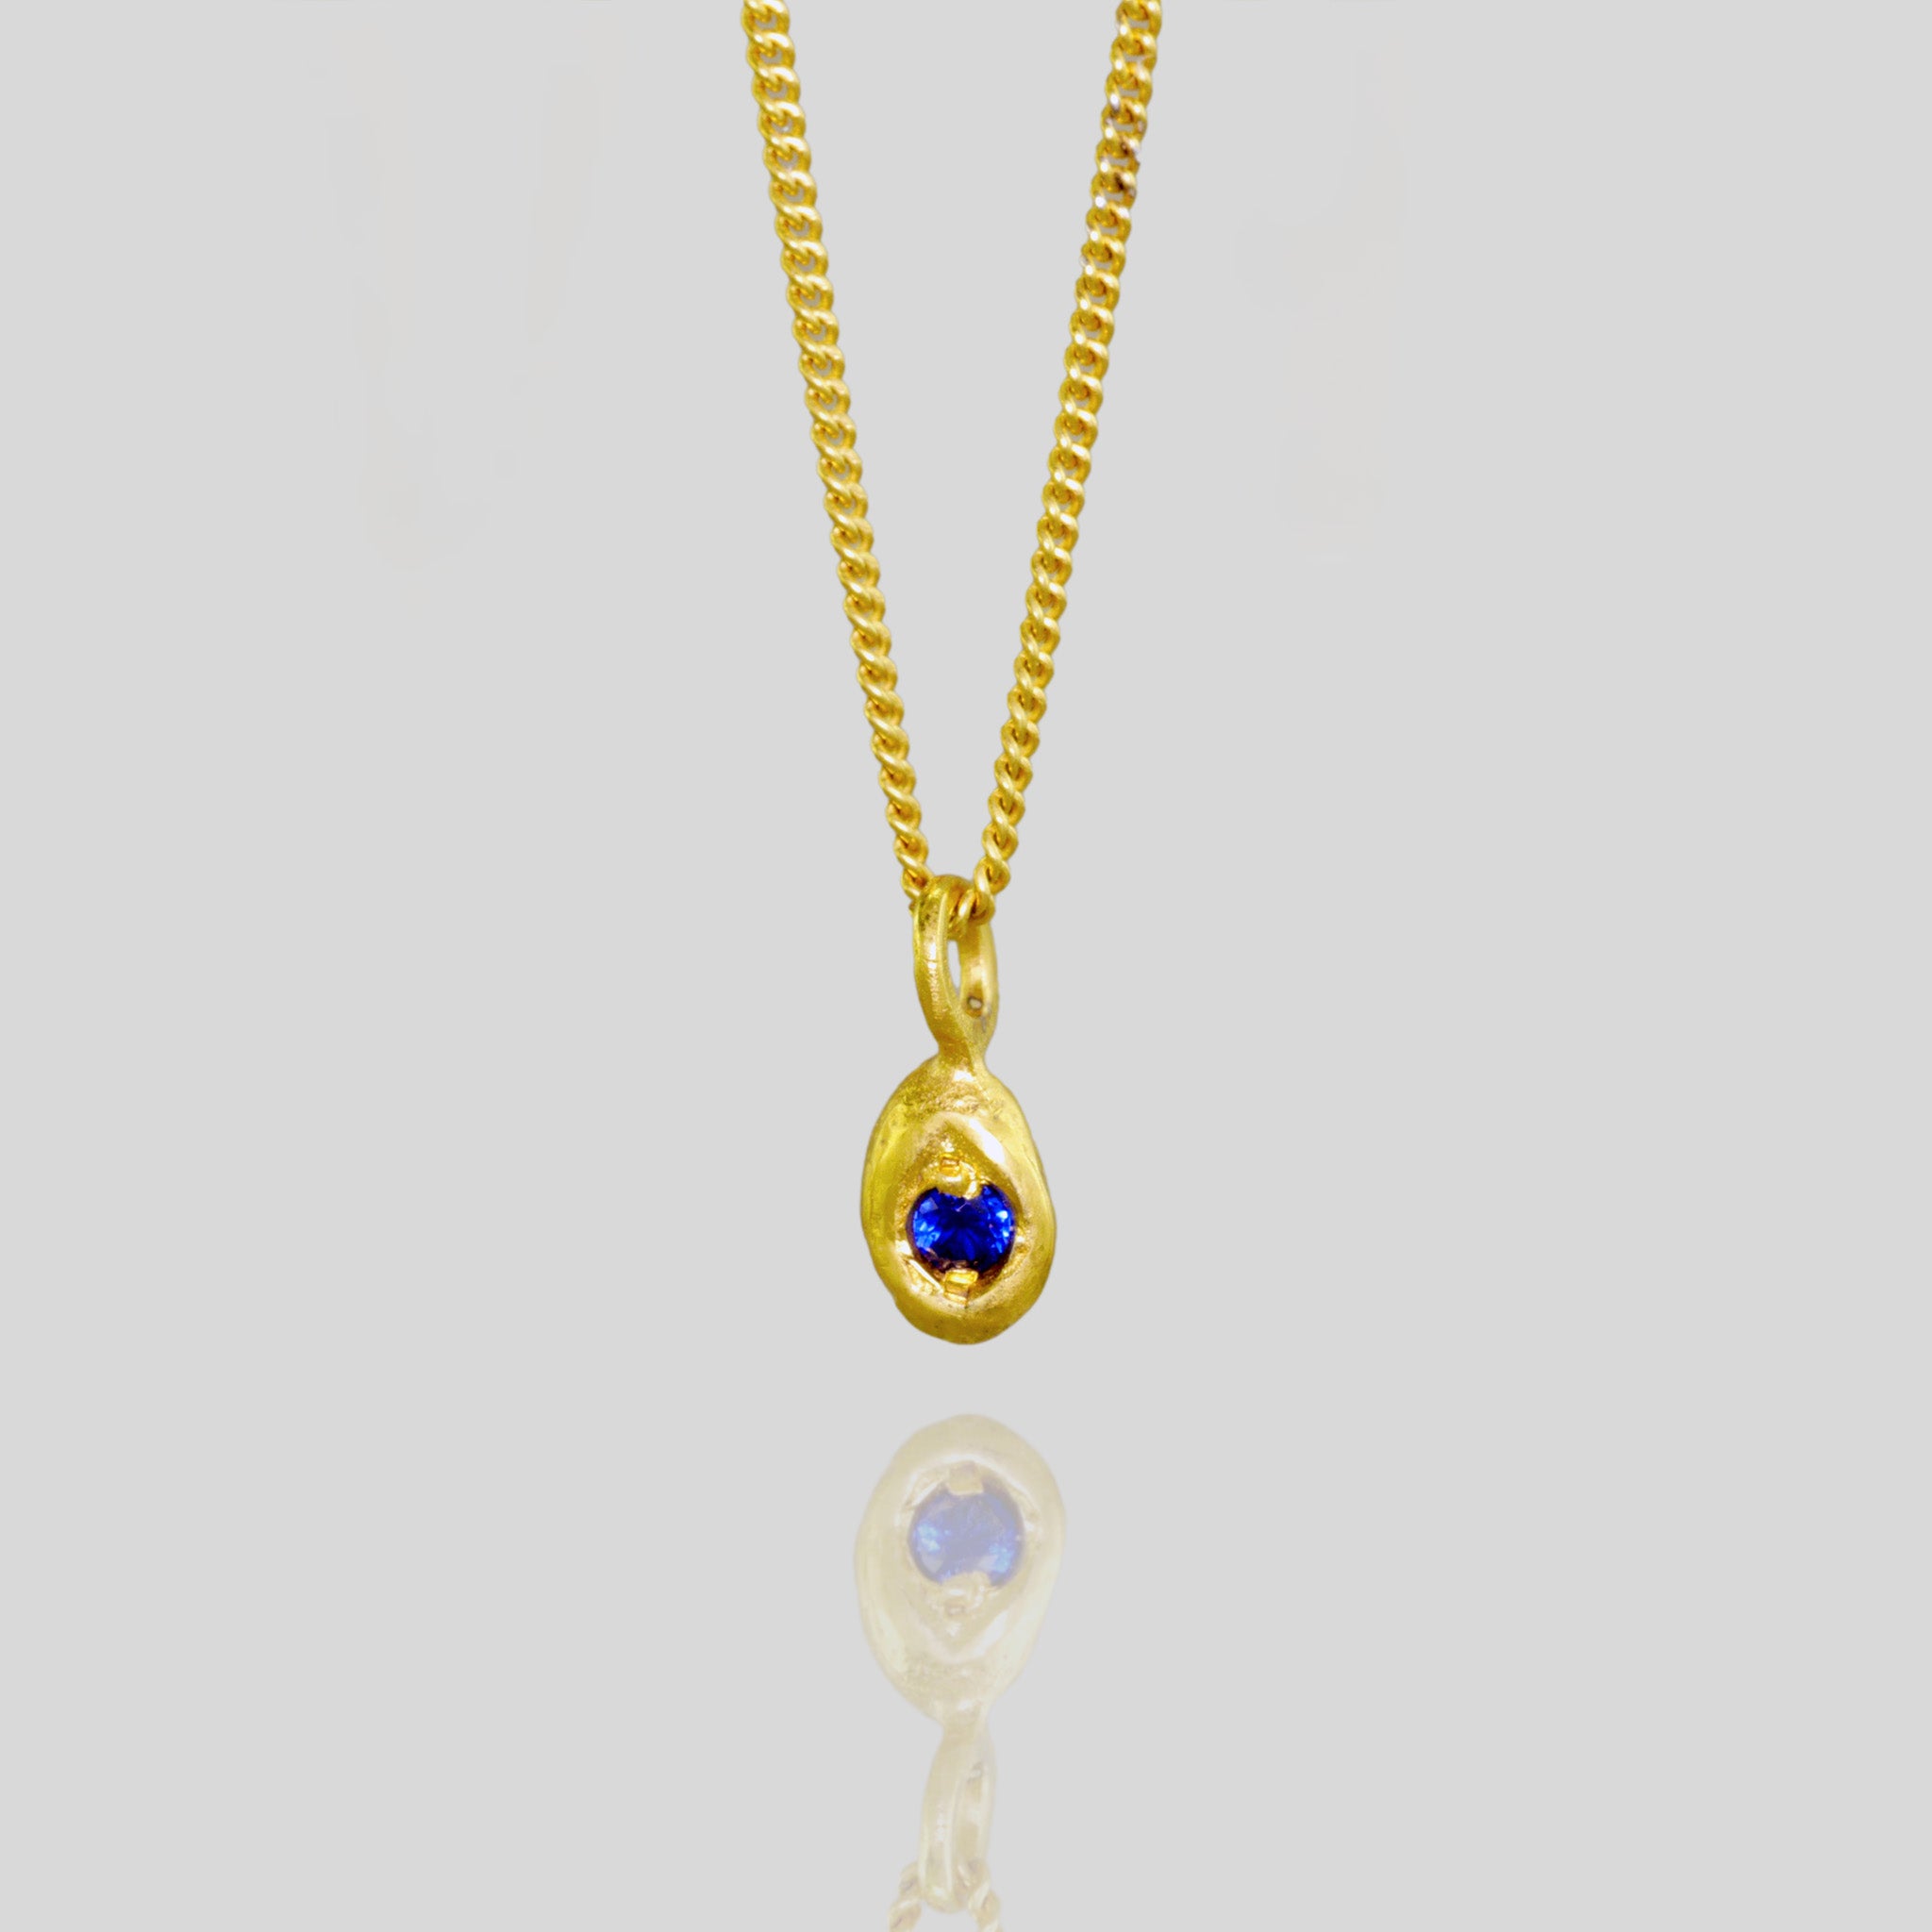 close up of an 18k Yellow Gold Pendant with a drop shape and a central sapphire, designed to replicate a naturally gathered dried seed.